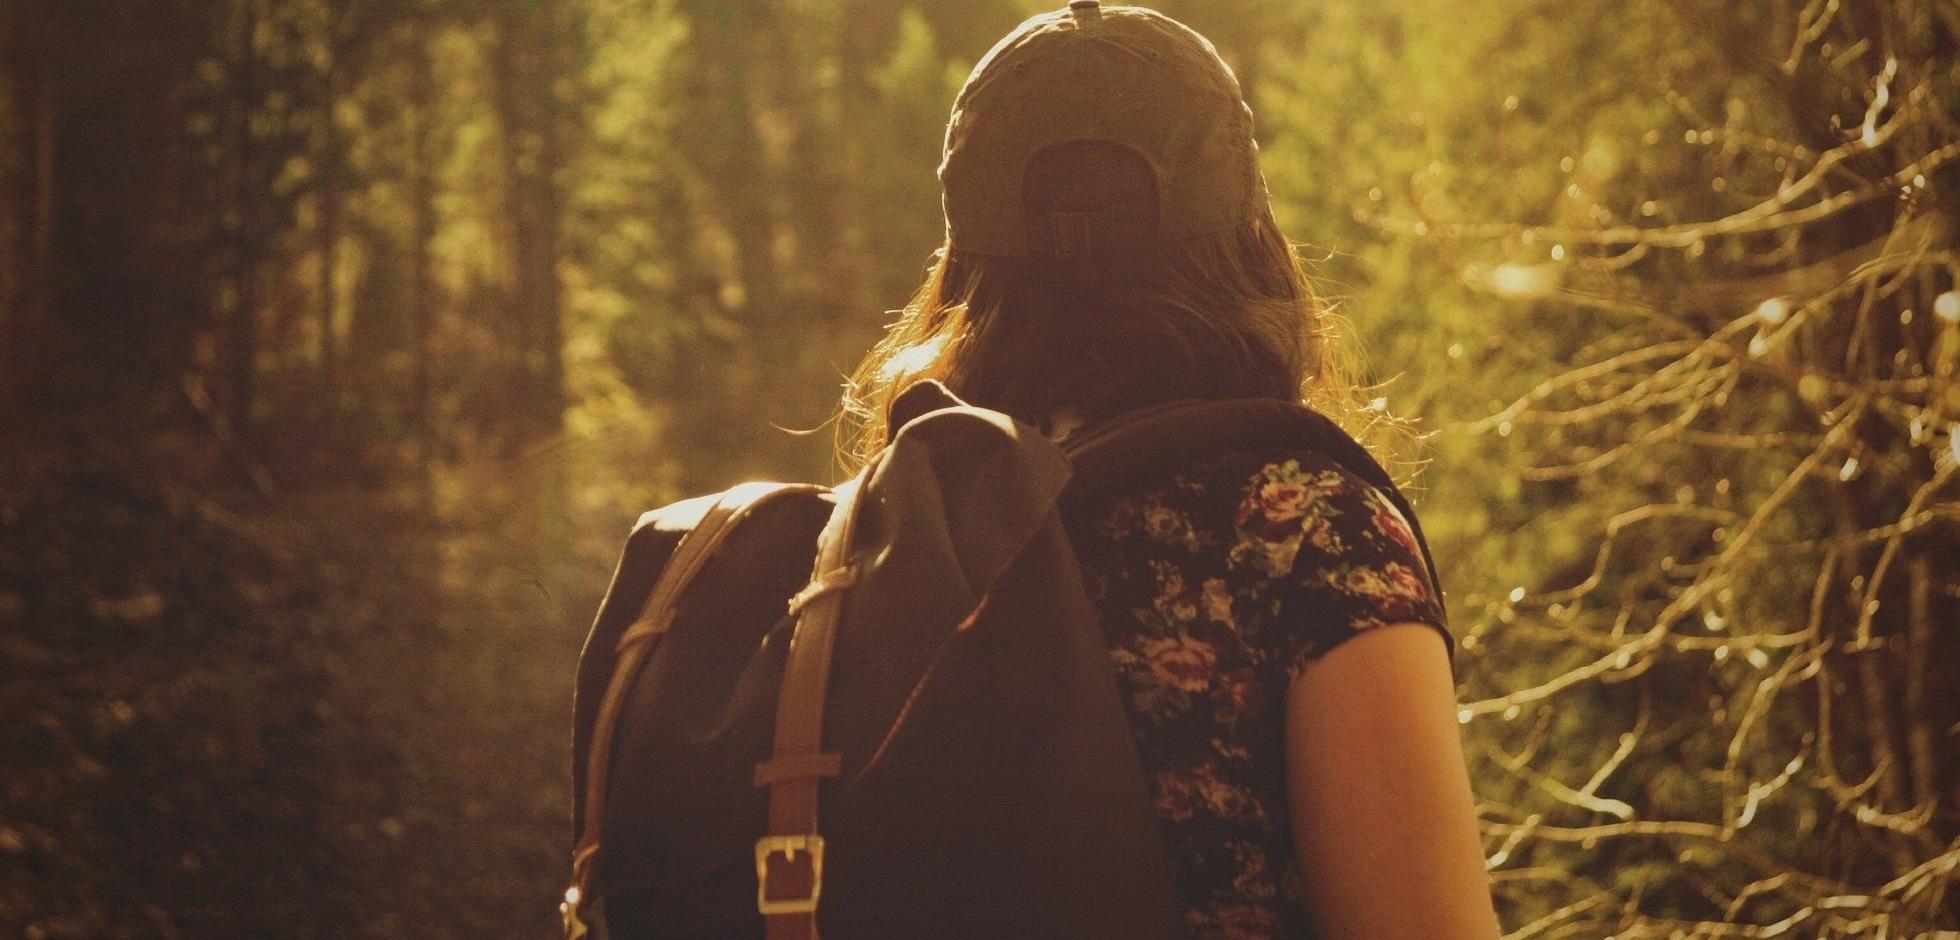 A female with a backpack hiking in a forest